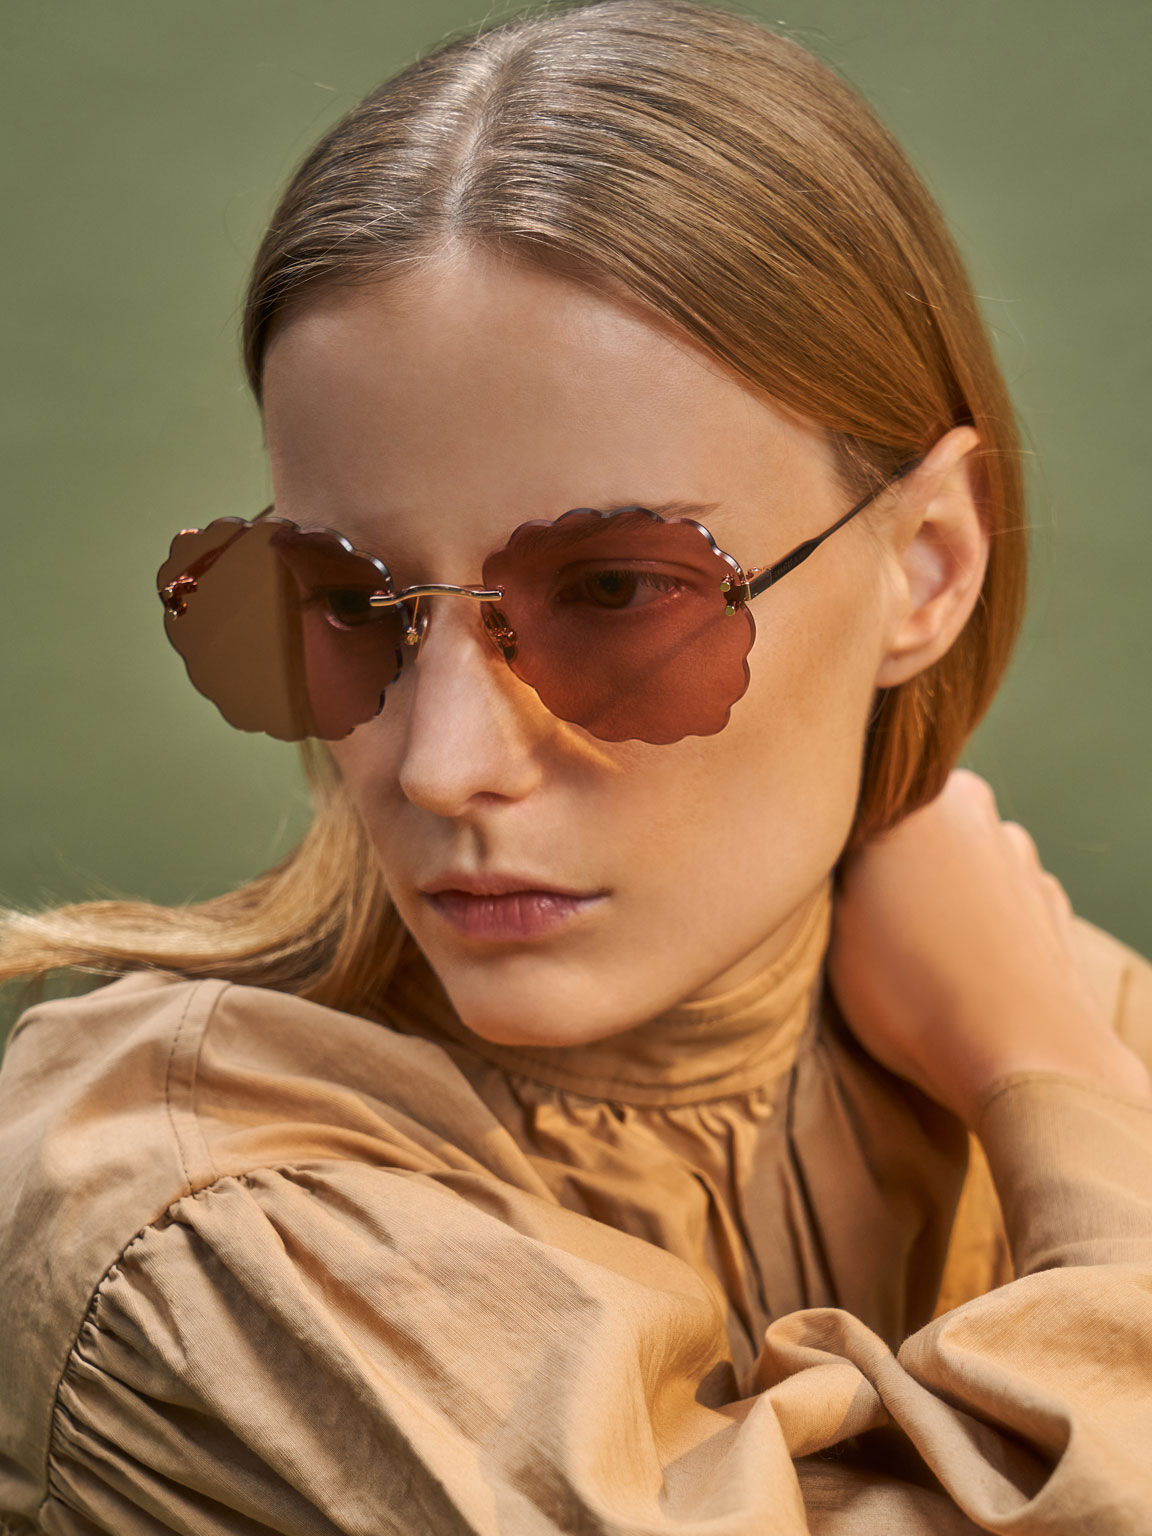 Scalloped Butterfly Sunglasses, Rose Gold, hi-res